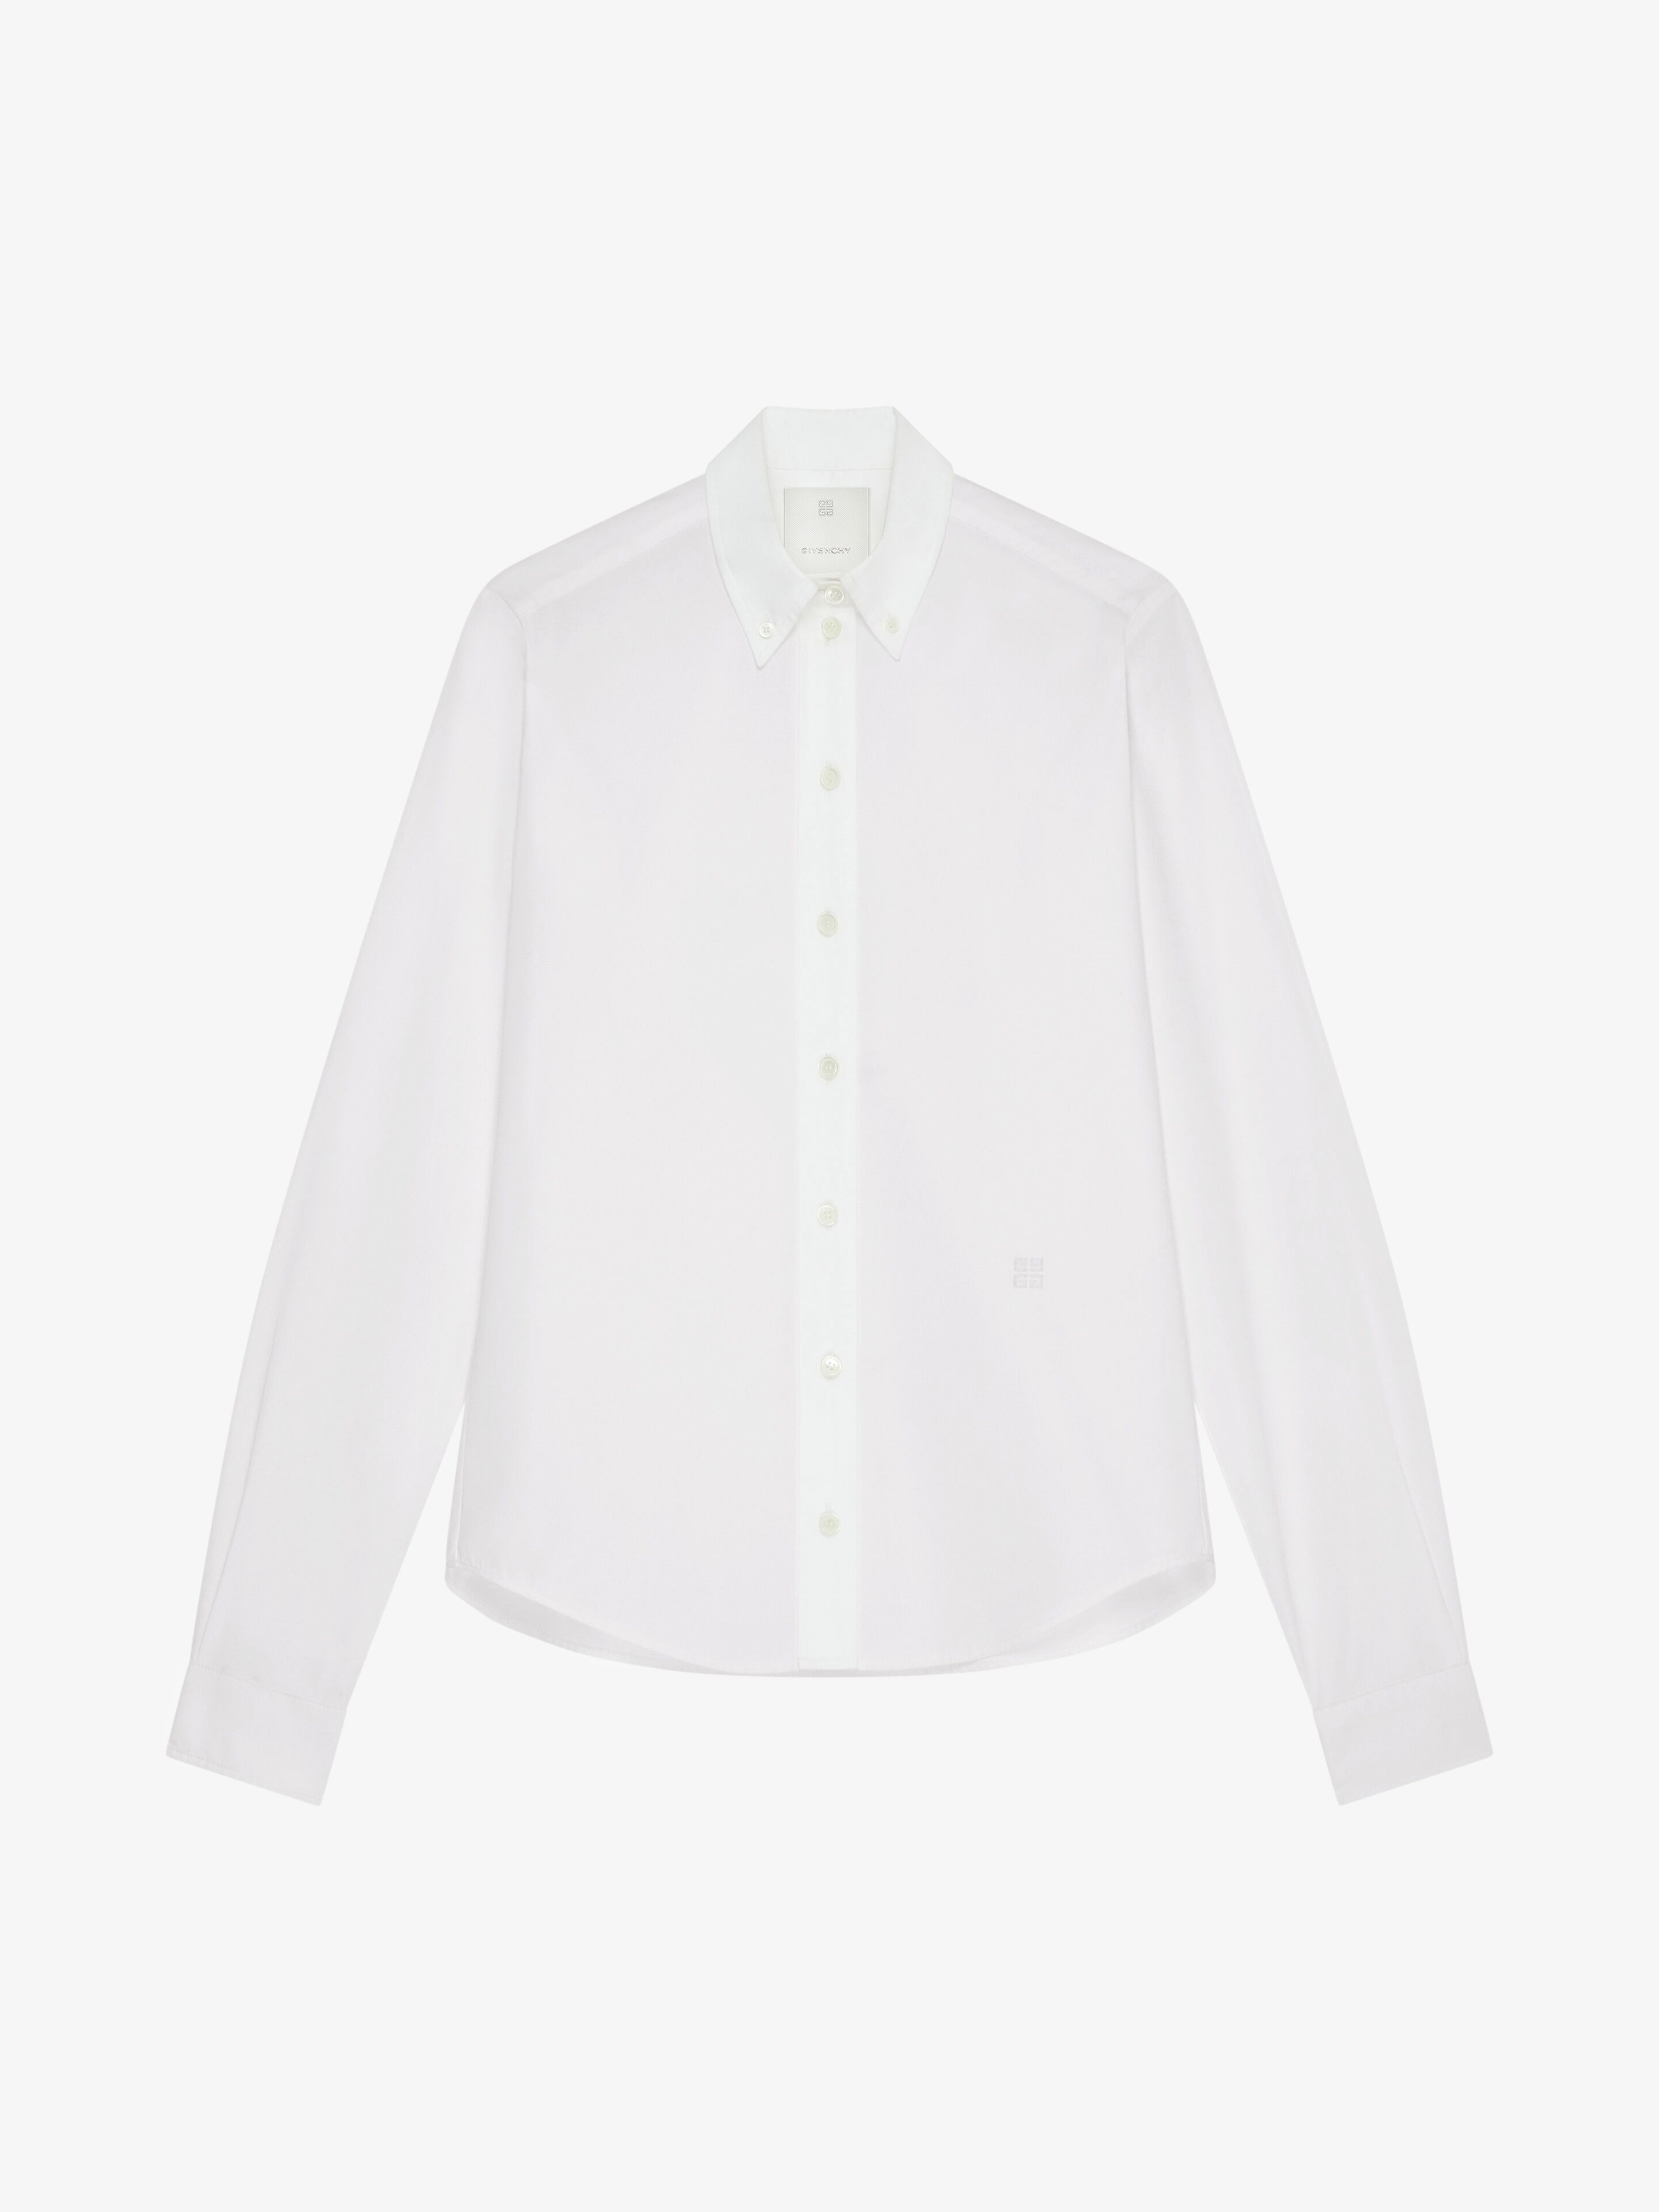 CLASSIC OXFORD SHIRT IN EMBROIDERED POPLIN - 1